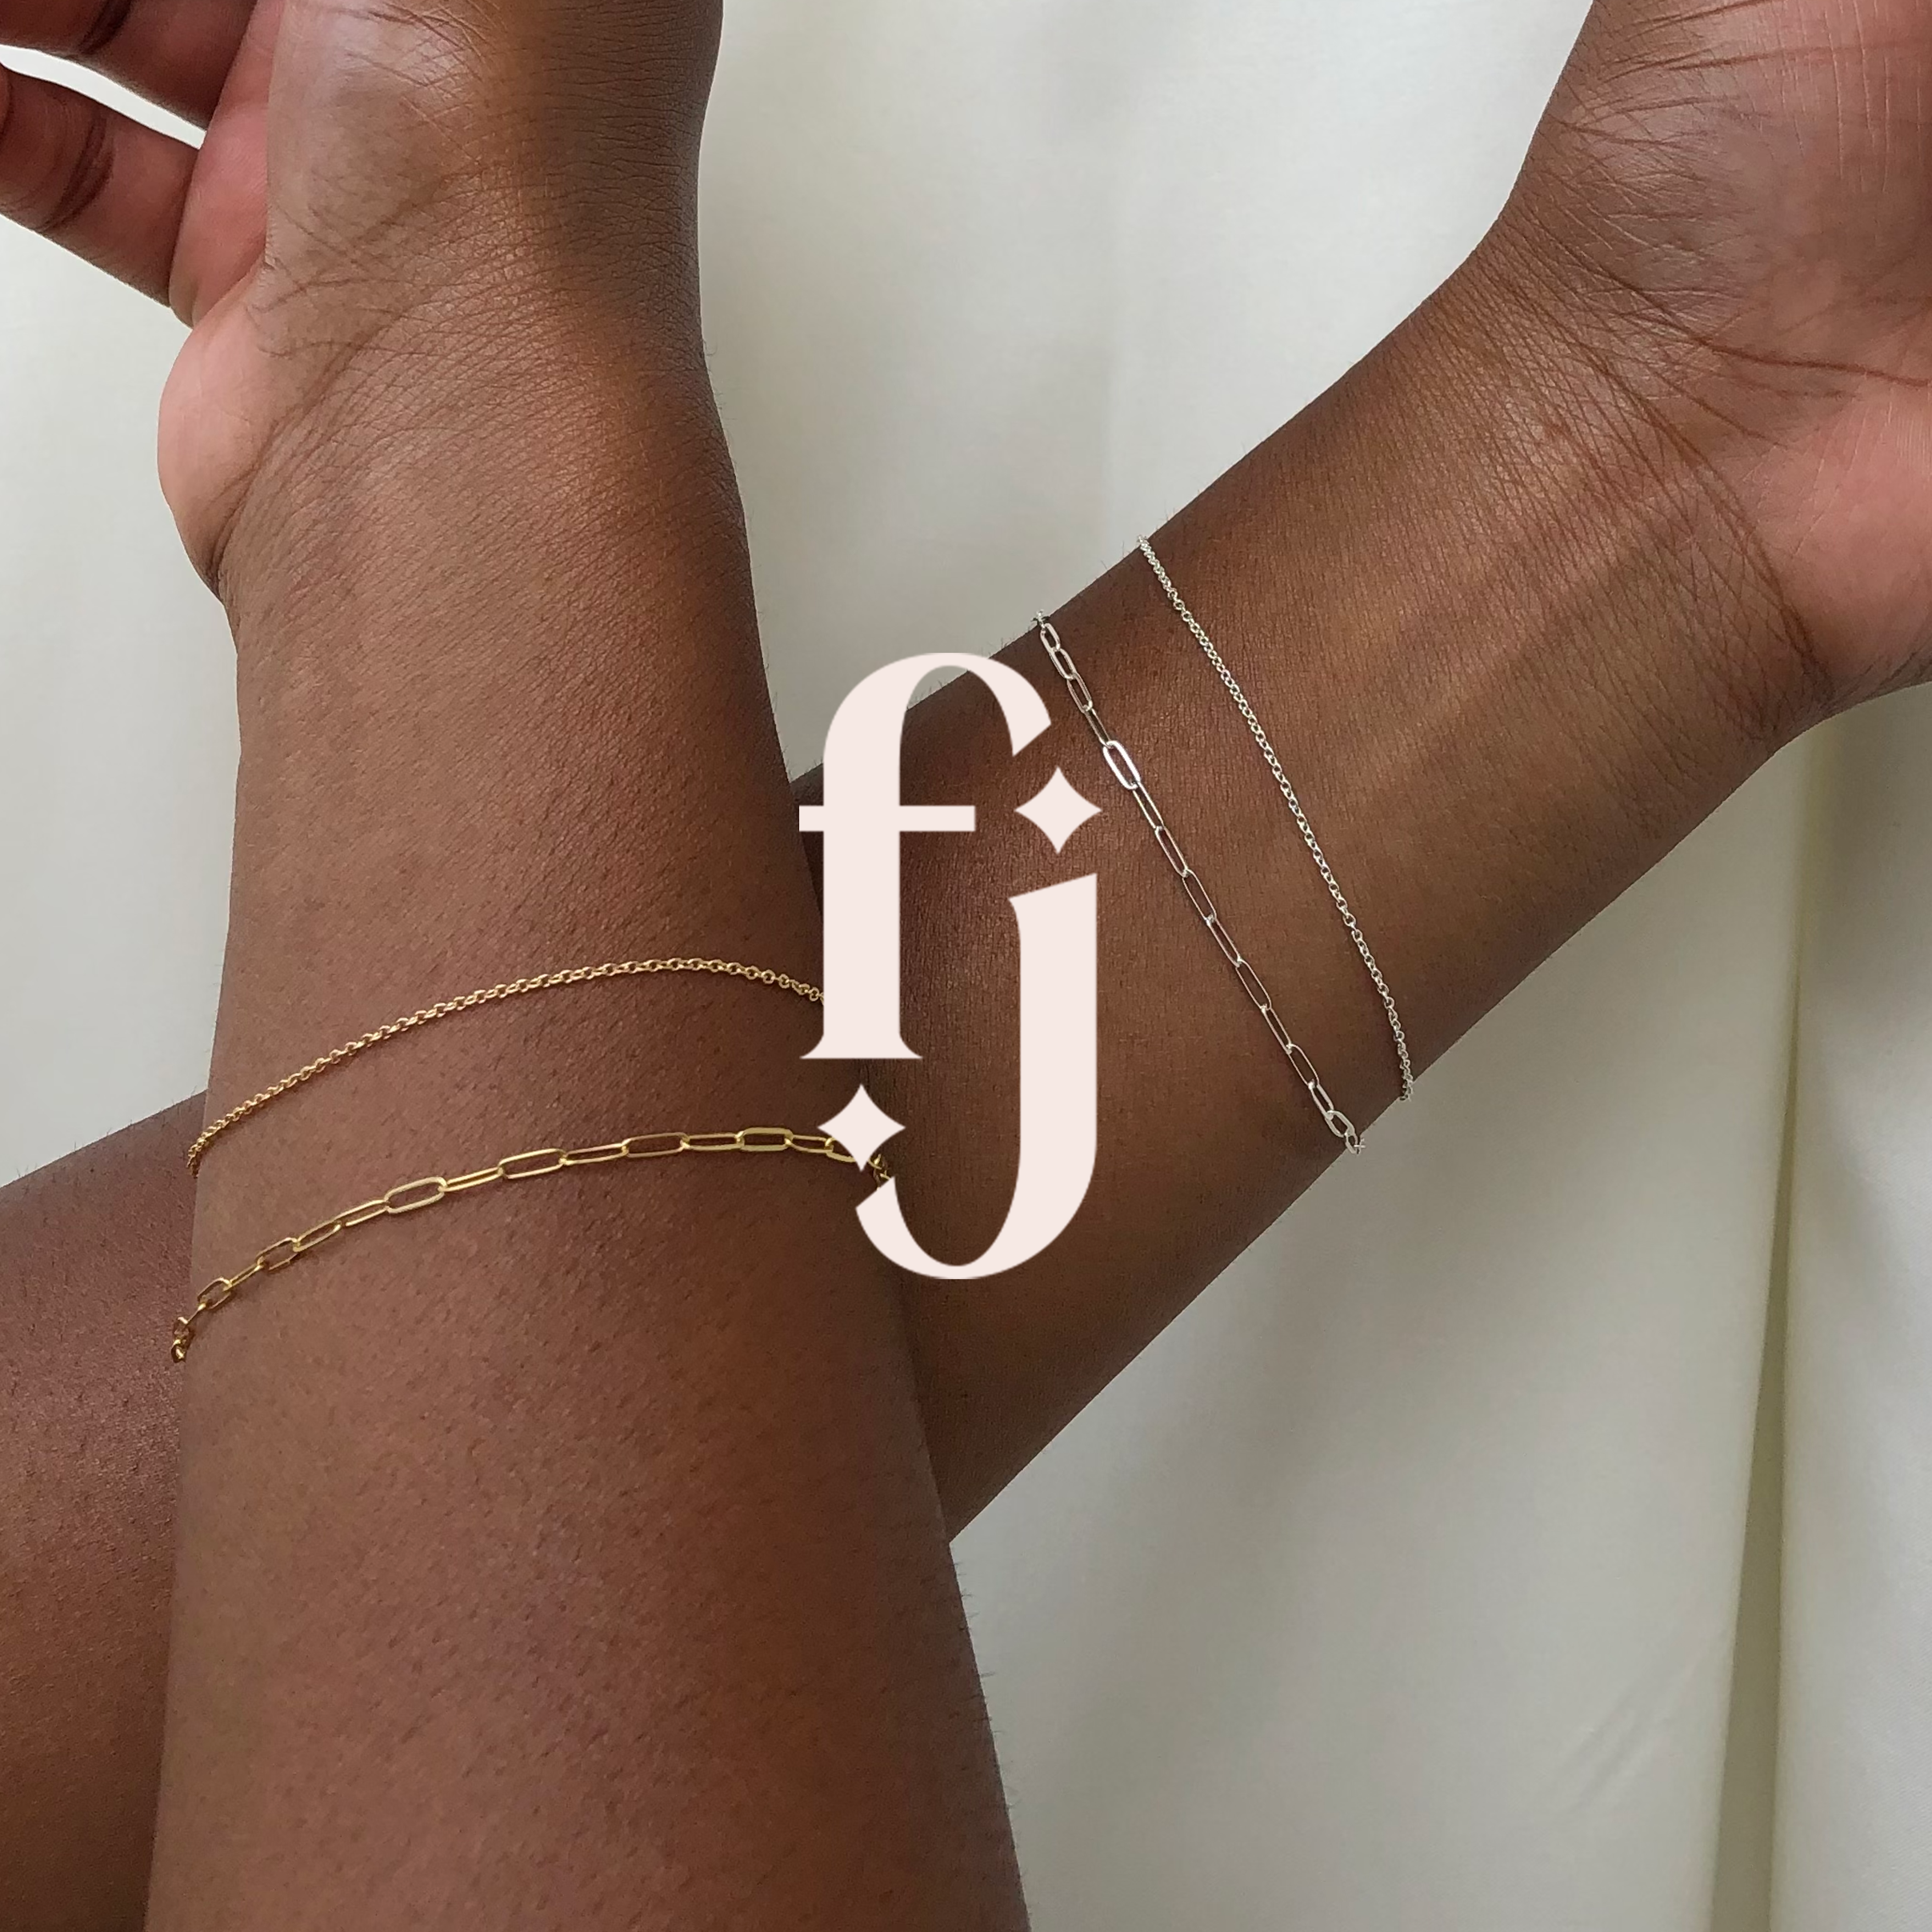 Permanent Forever Bracelets - Book Now - Alexandra Marks Jewelry Chicago - Go Viral!